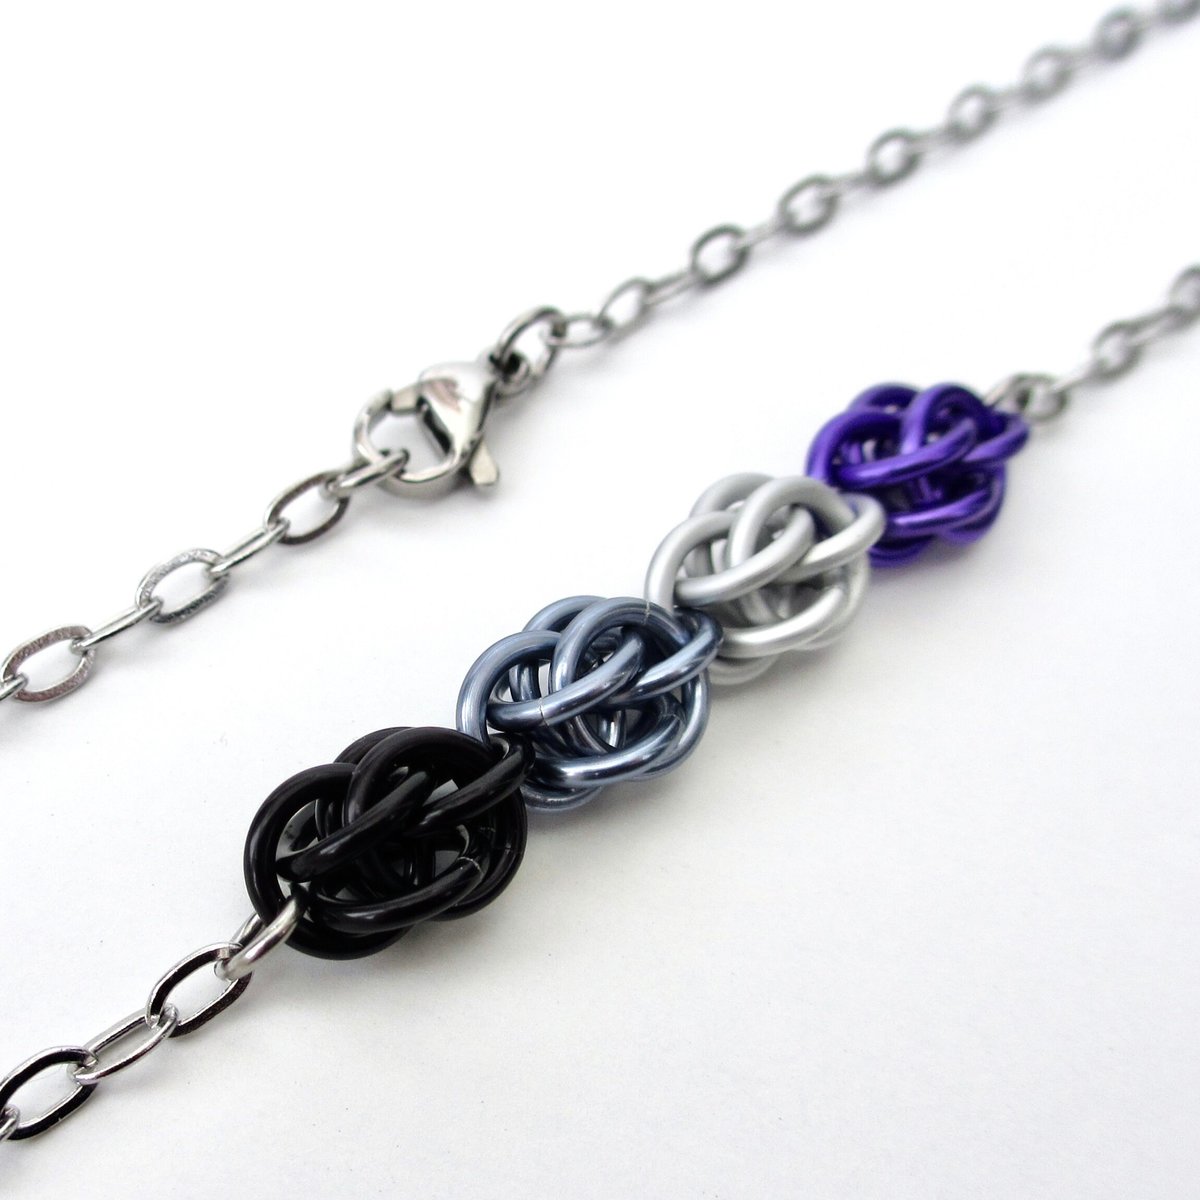 Ace pride necklace, chainmail Sweetpea weave, asexual pride jewelry